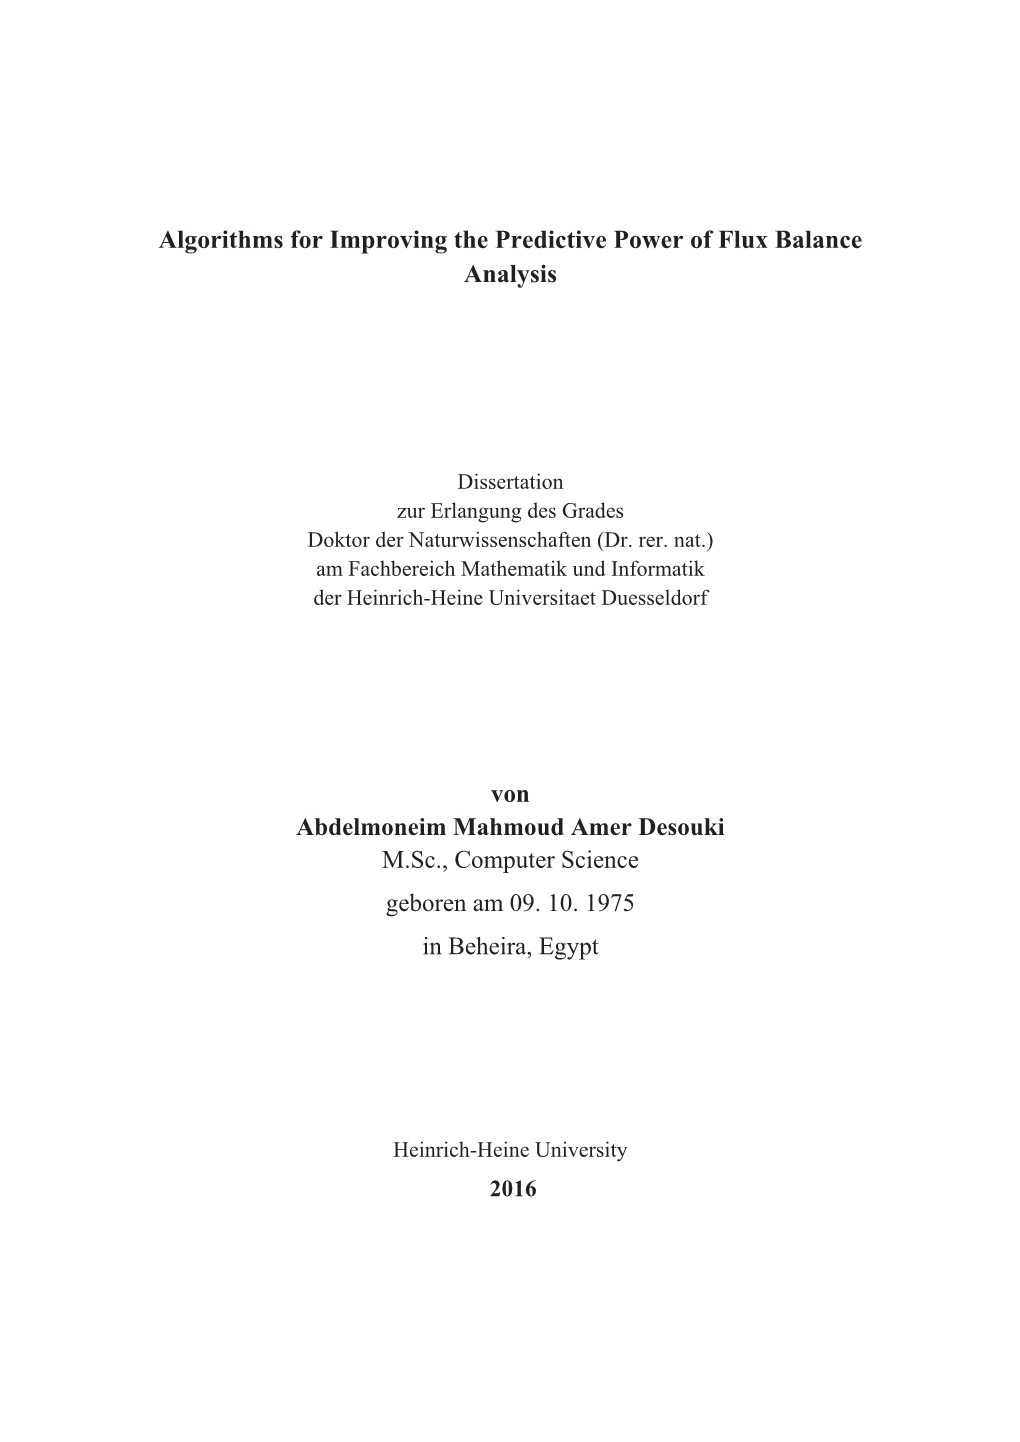 Algorithms for Improving the Predictive Power of Flux Balance Analysis